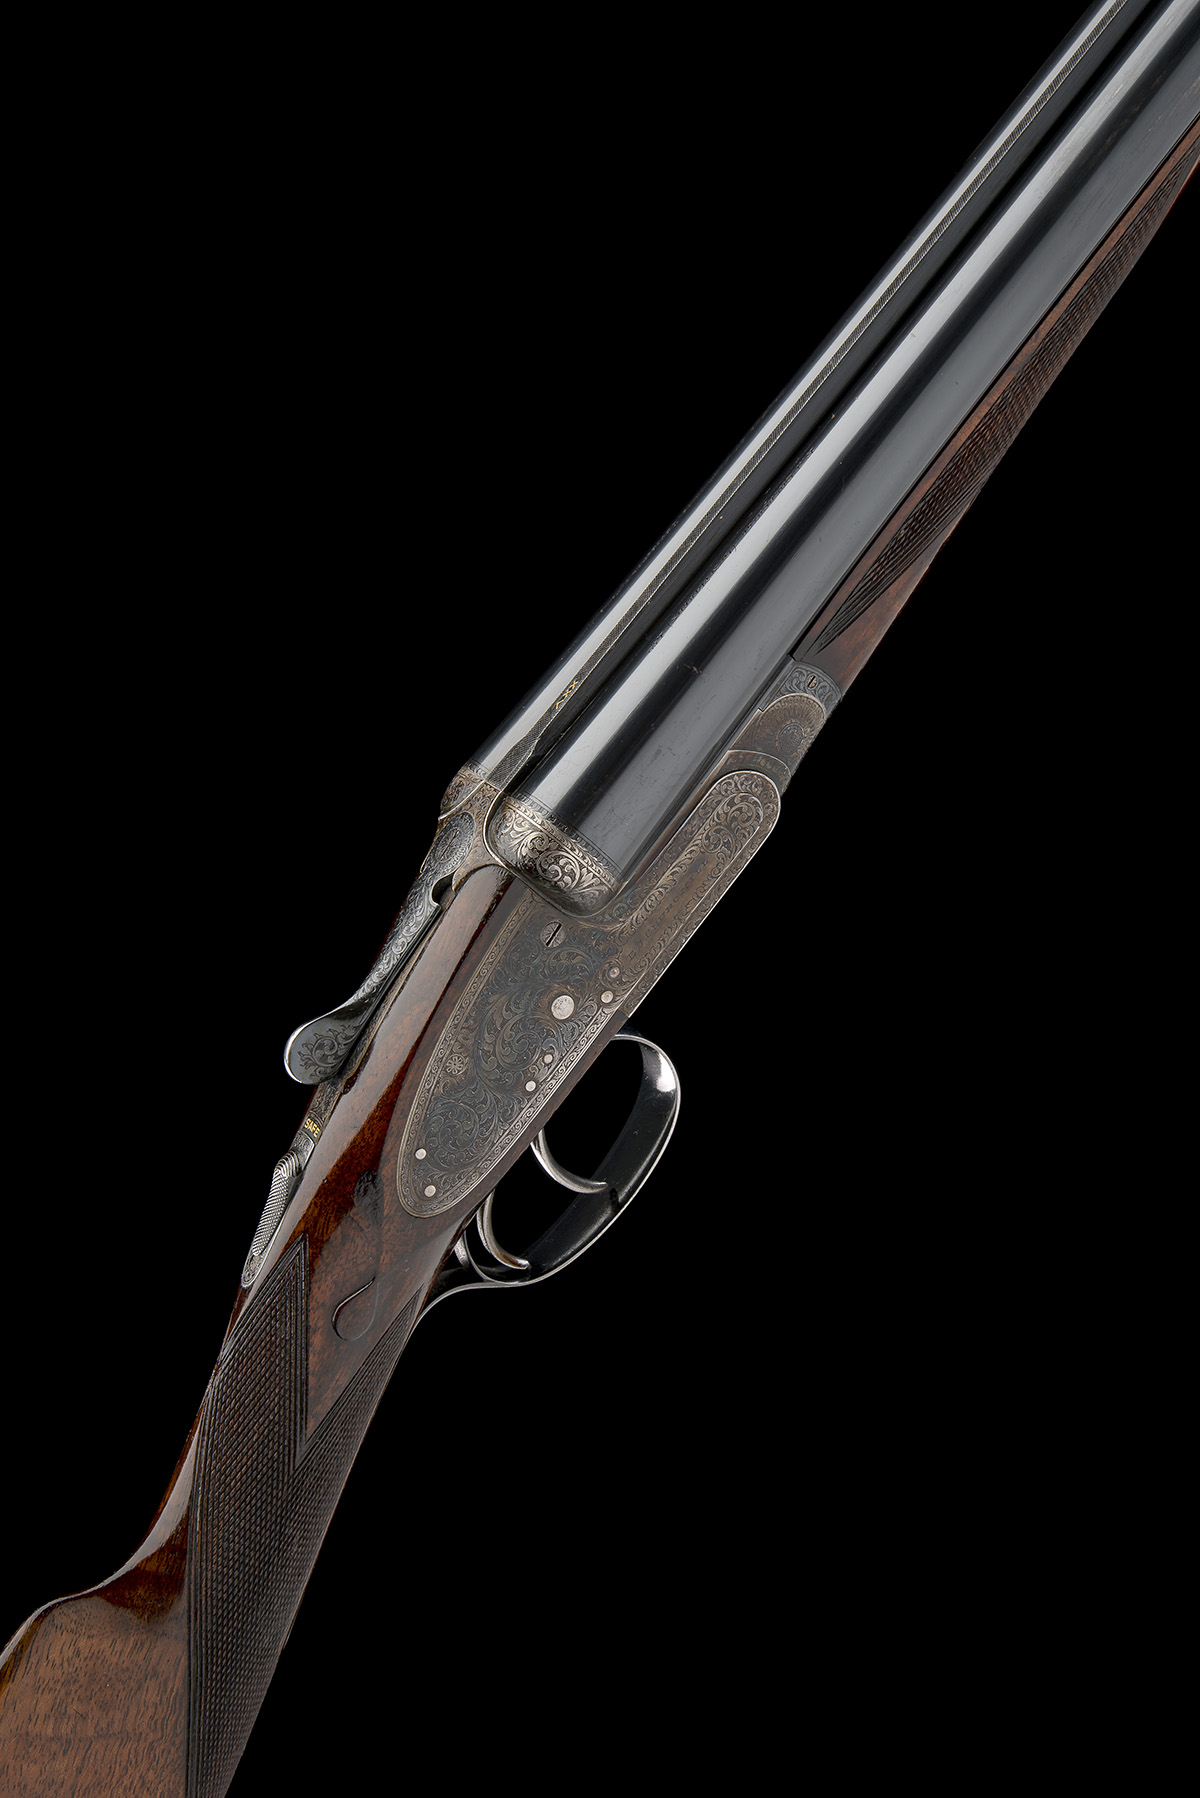 E. J. CHURCHILL (GUNMAKERS) LTD. A 12-BORE 'IMPERIAL' ASSISTED-OPENING SIDELOCK EJECTOR, serial